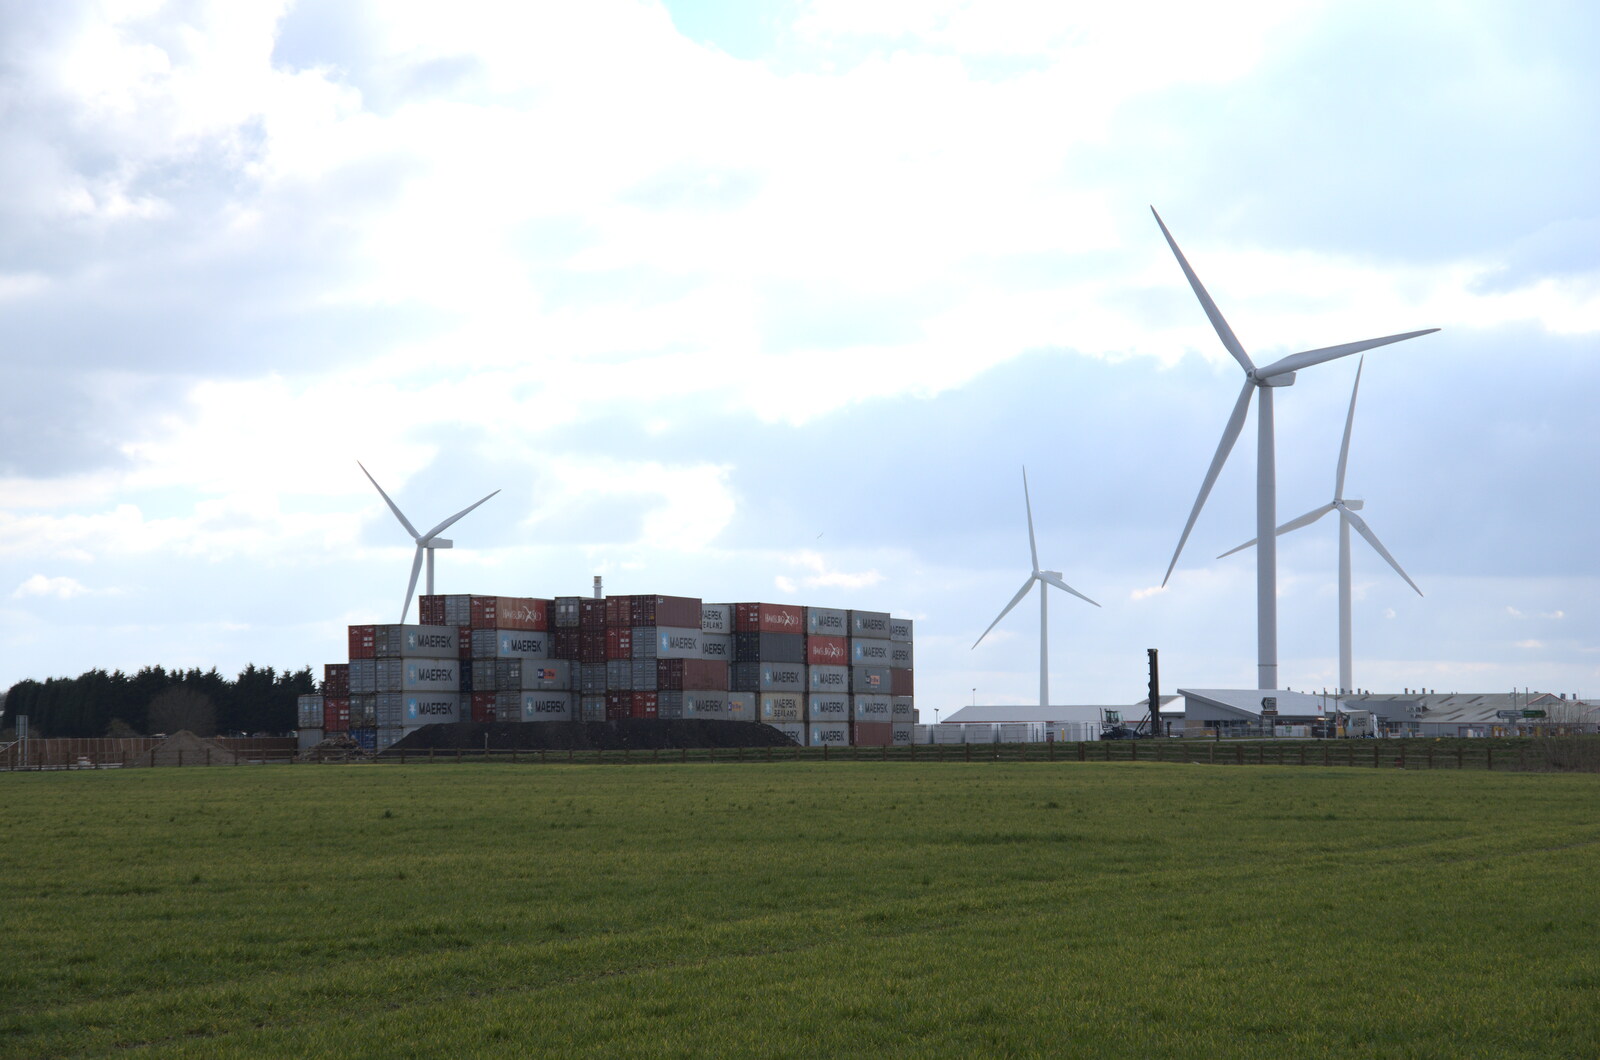 Container Mountain and the wind turbines from Weybread Pits and a Sunday Walk, Brome, Suffolk - 6th March 2022